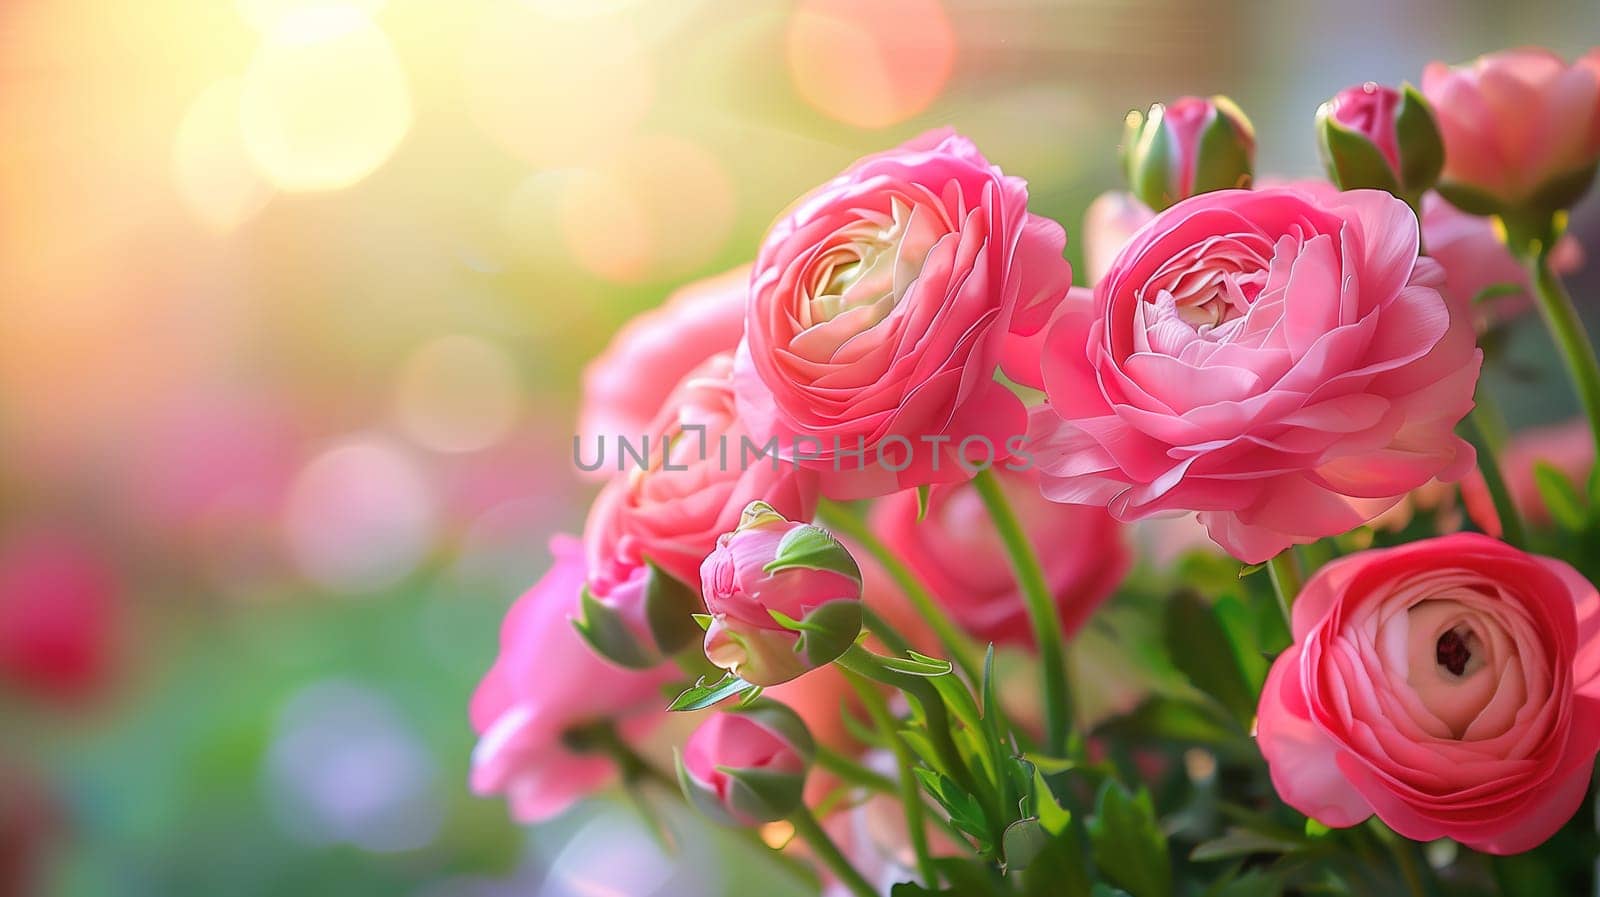 Pink Flowers in a Vase by TRMK